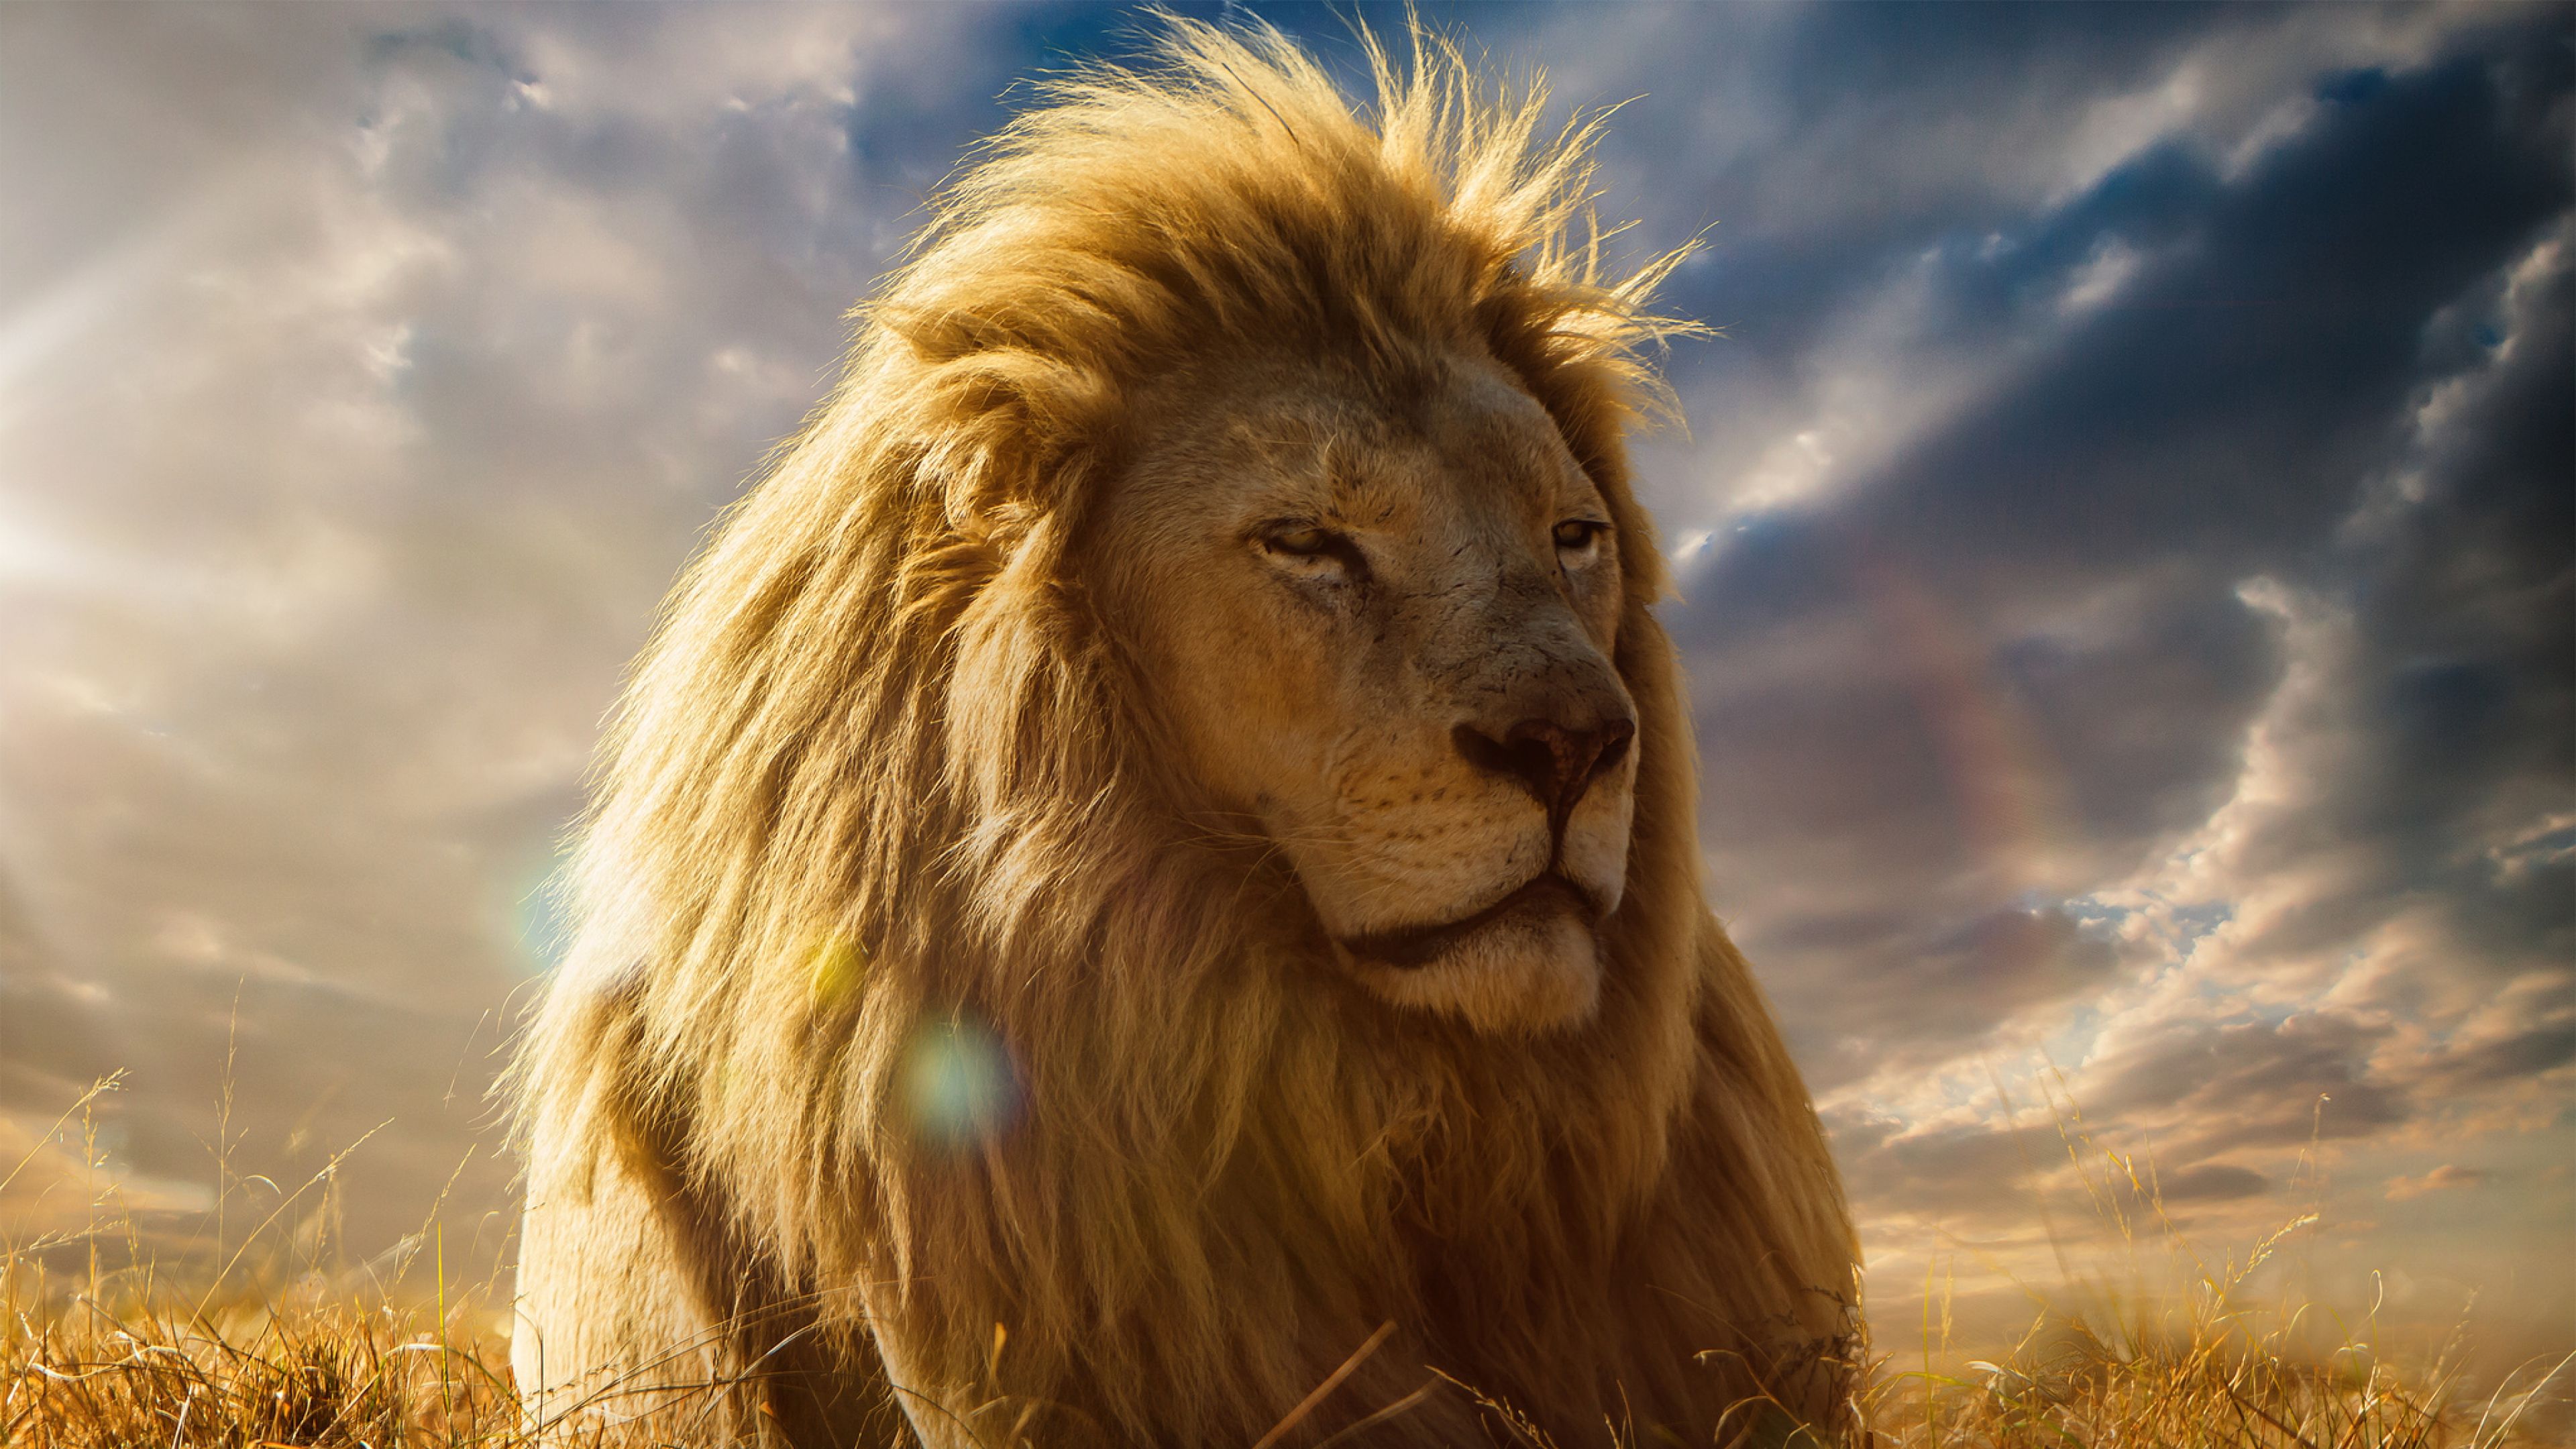 Lion King 4k, Hd Animals, 4k Wallpapers, Images, Backgrounds, - Lion Wallpaper 4k - HD Wallpaper 